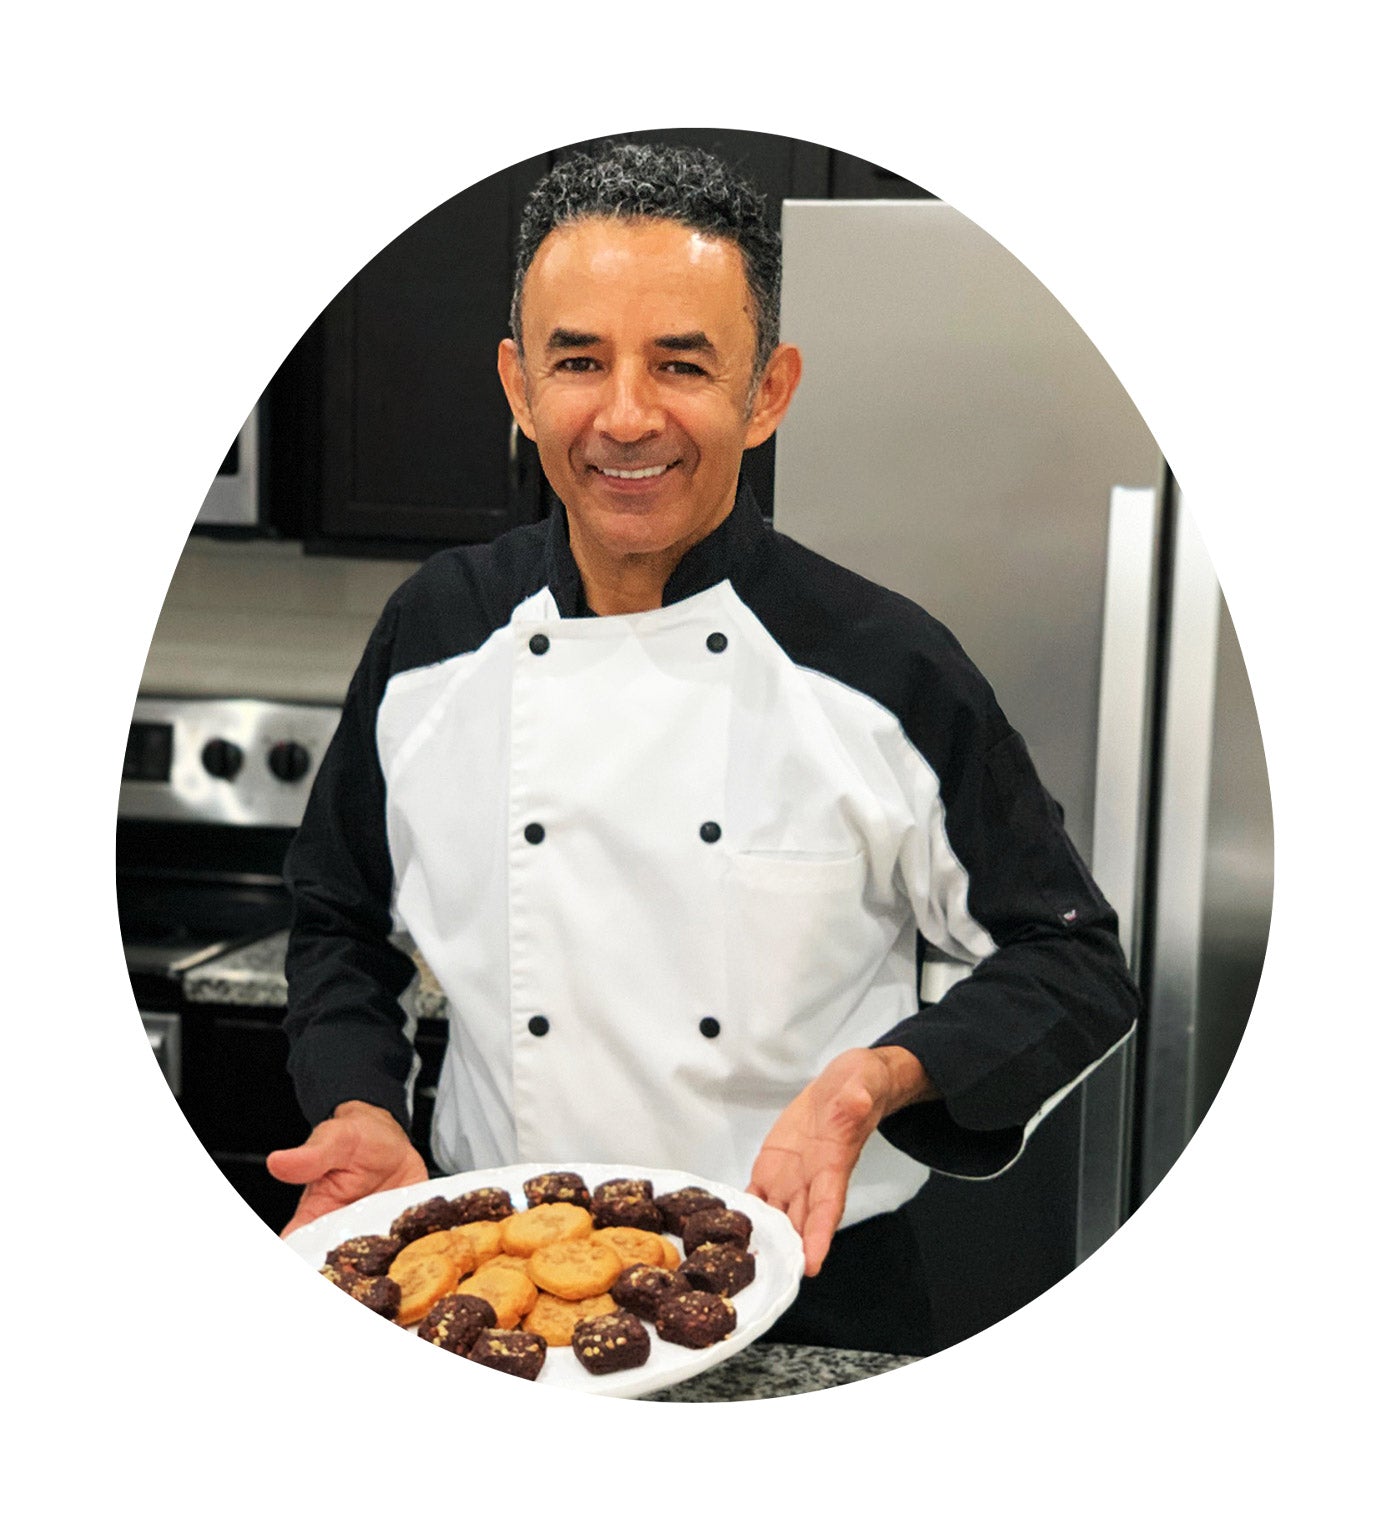 The creator of Chef Castro's Nouvo, Chef Castro, baking gluten free, dairy free, sugar free, low carb cookies and brownies.